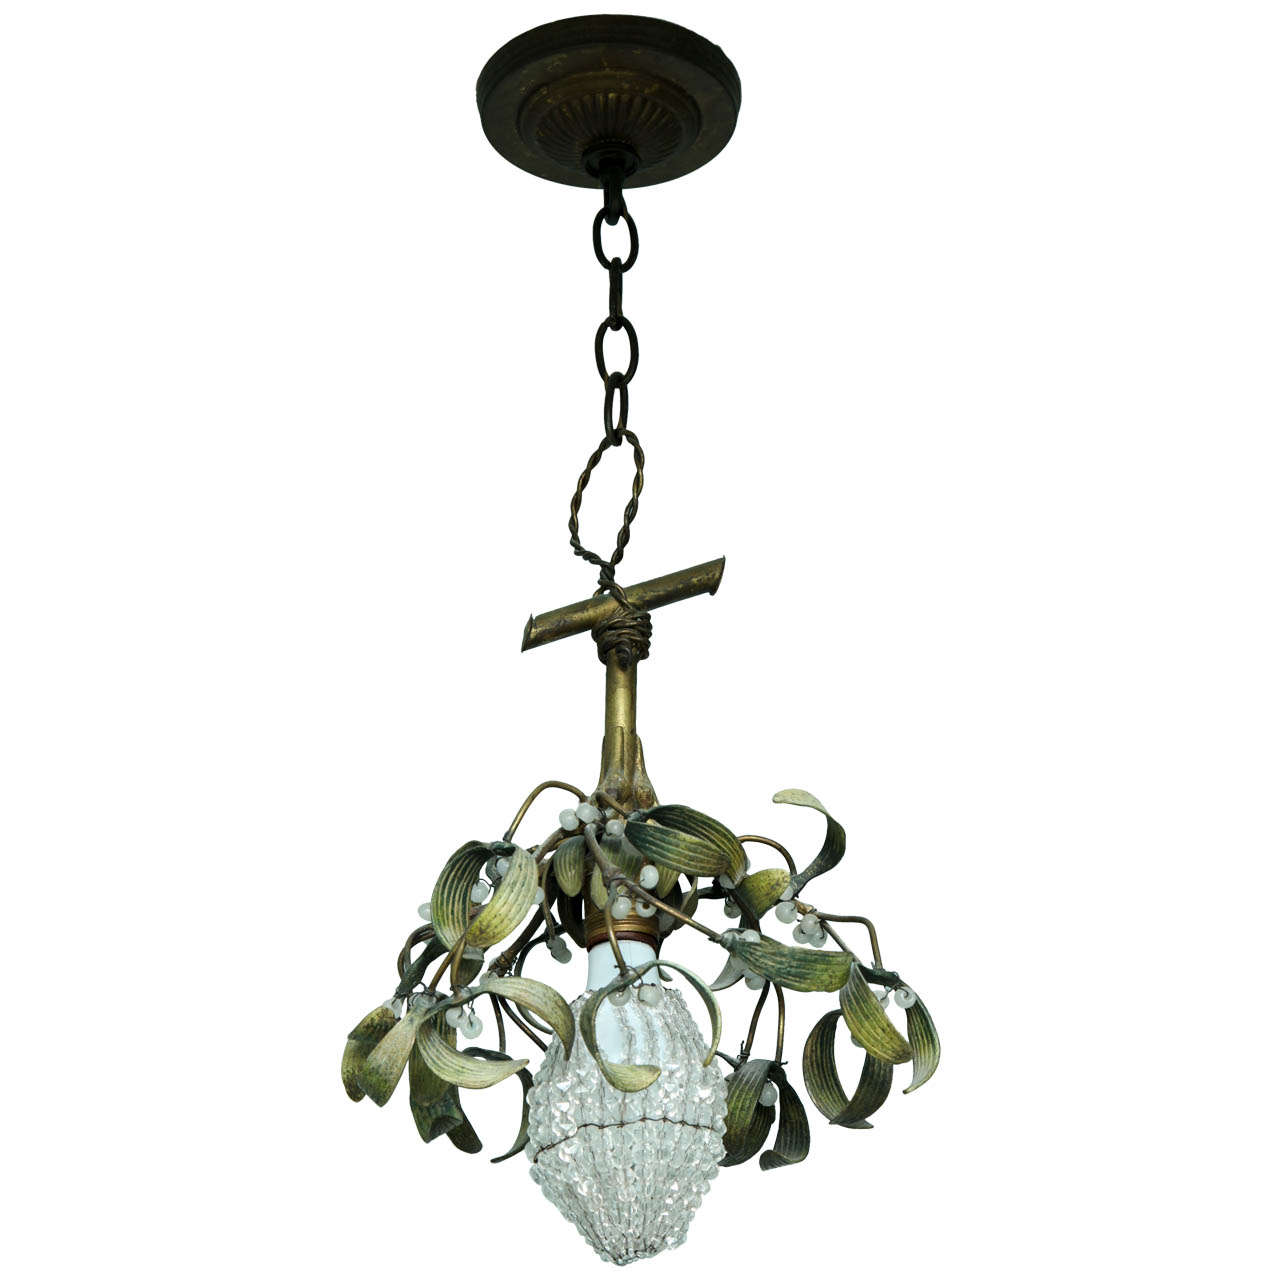 An Antique French Crystal Beaded Chinoiserie Chandelier